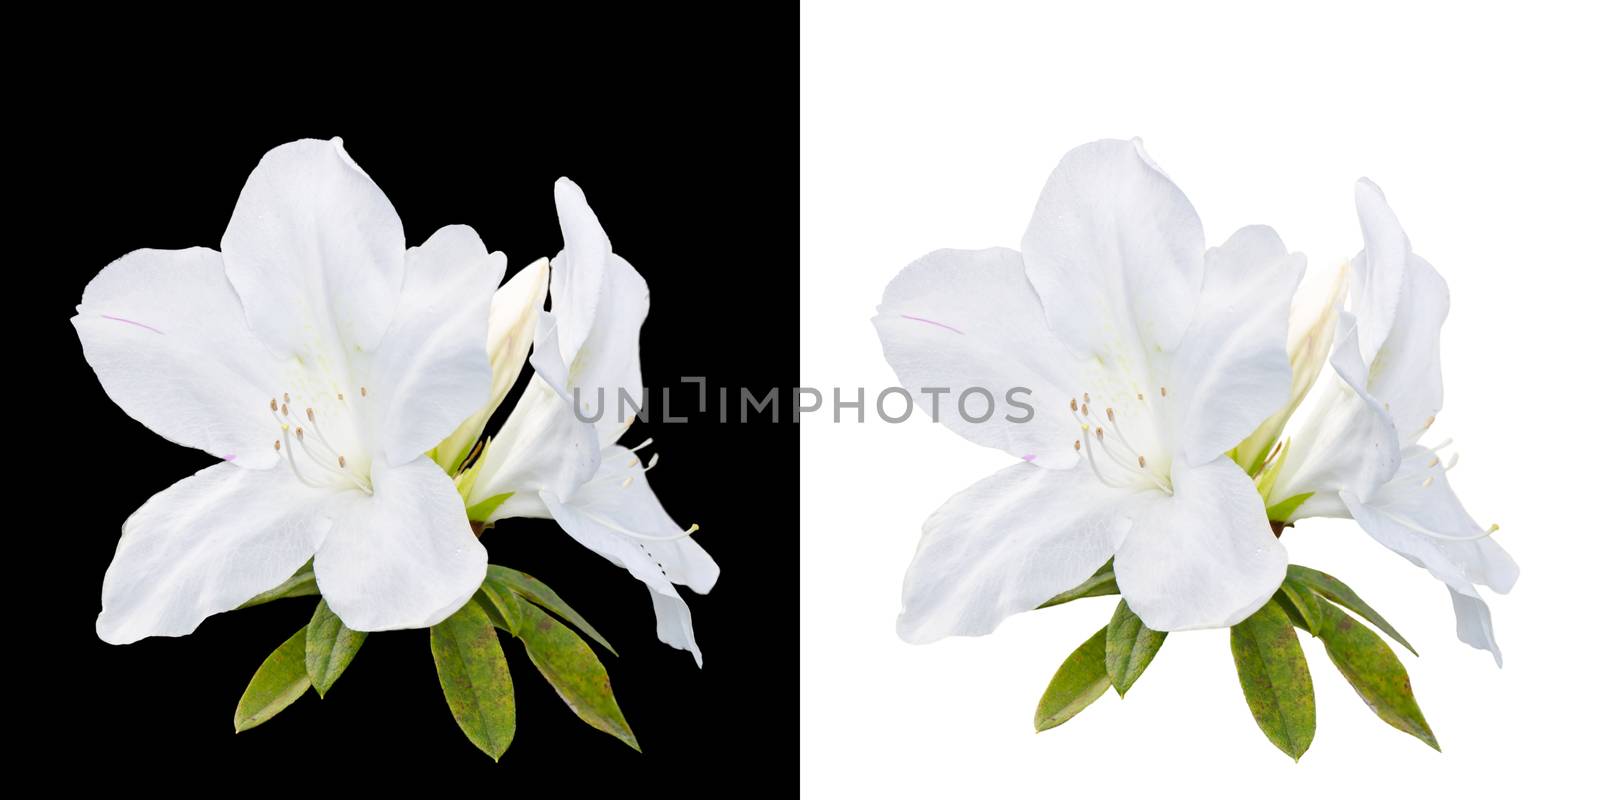 Rhododendron moulmeinene Hook ( Ericaceae ) flowers seen on the high mountains of Thailand on white and black background